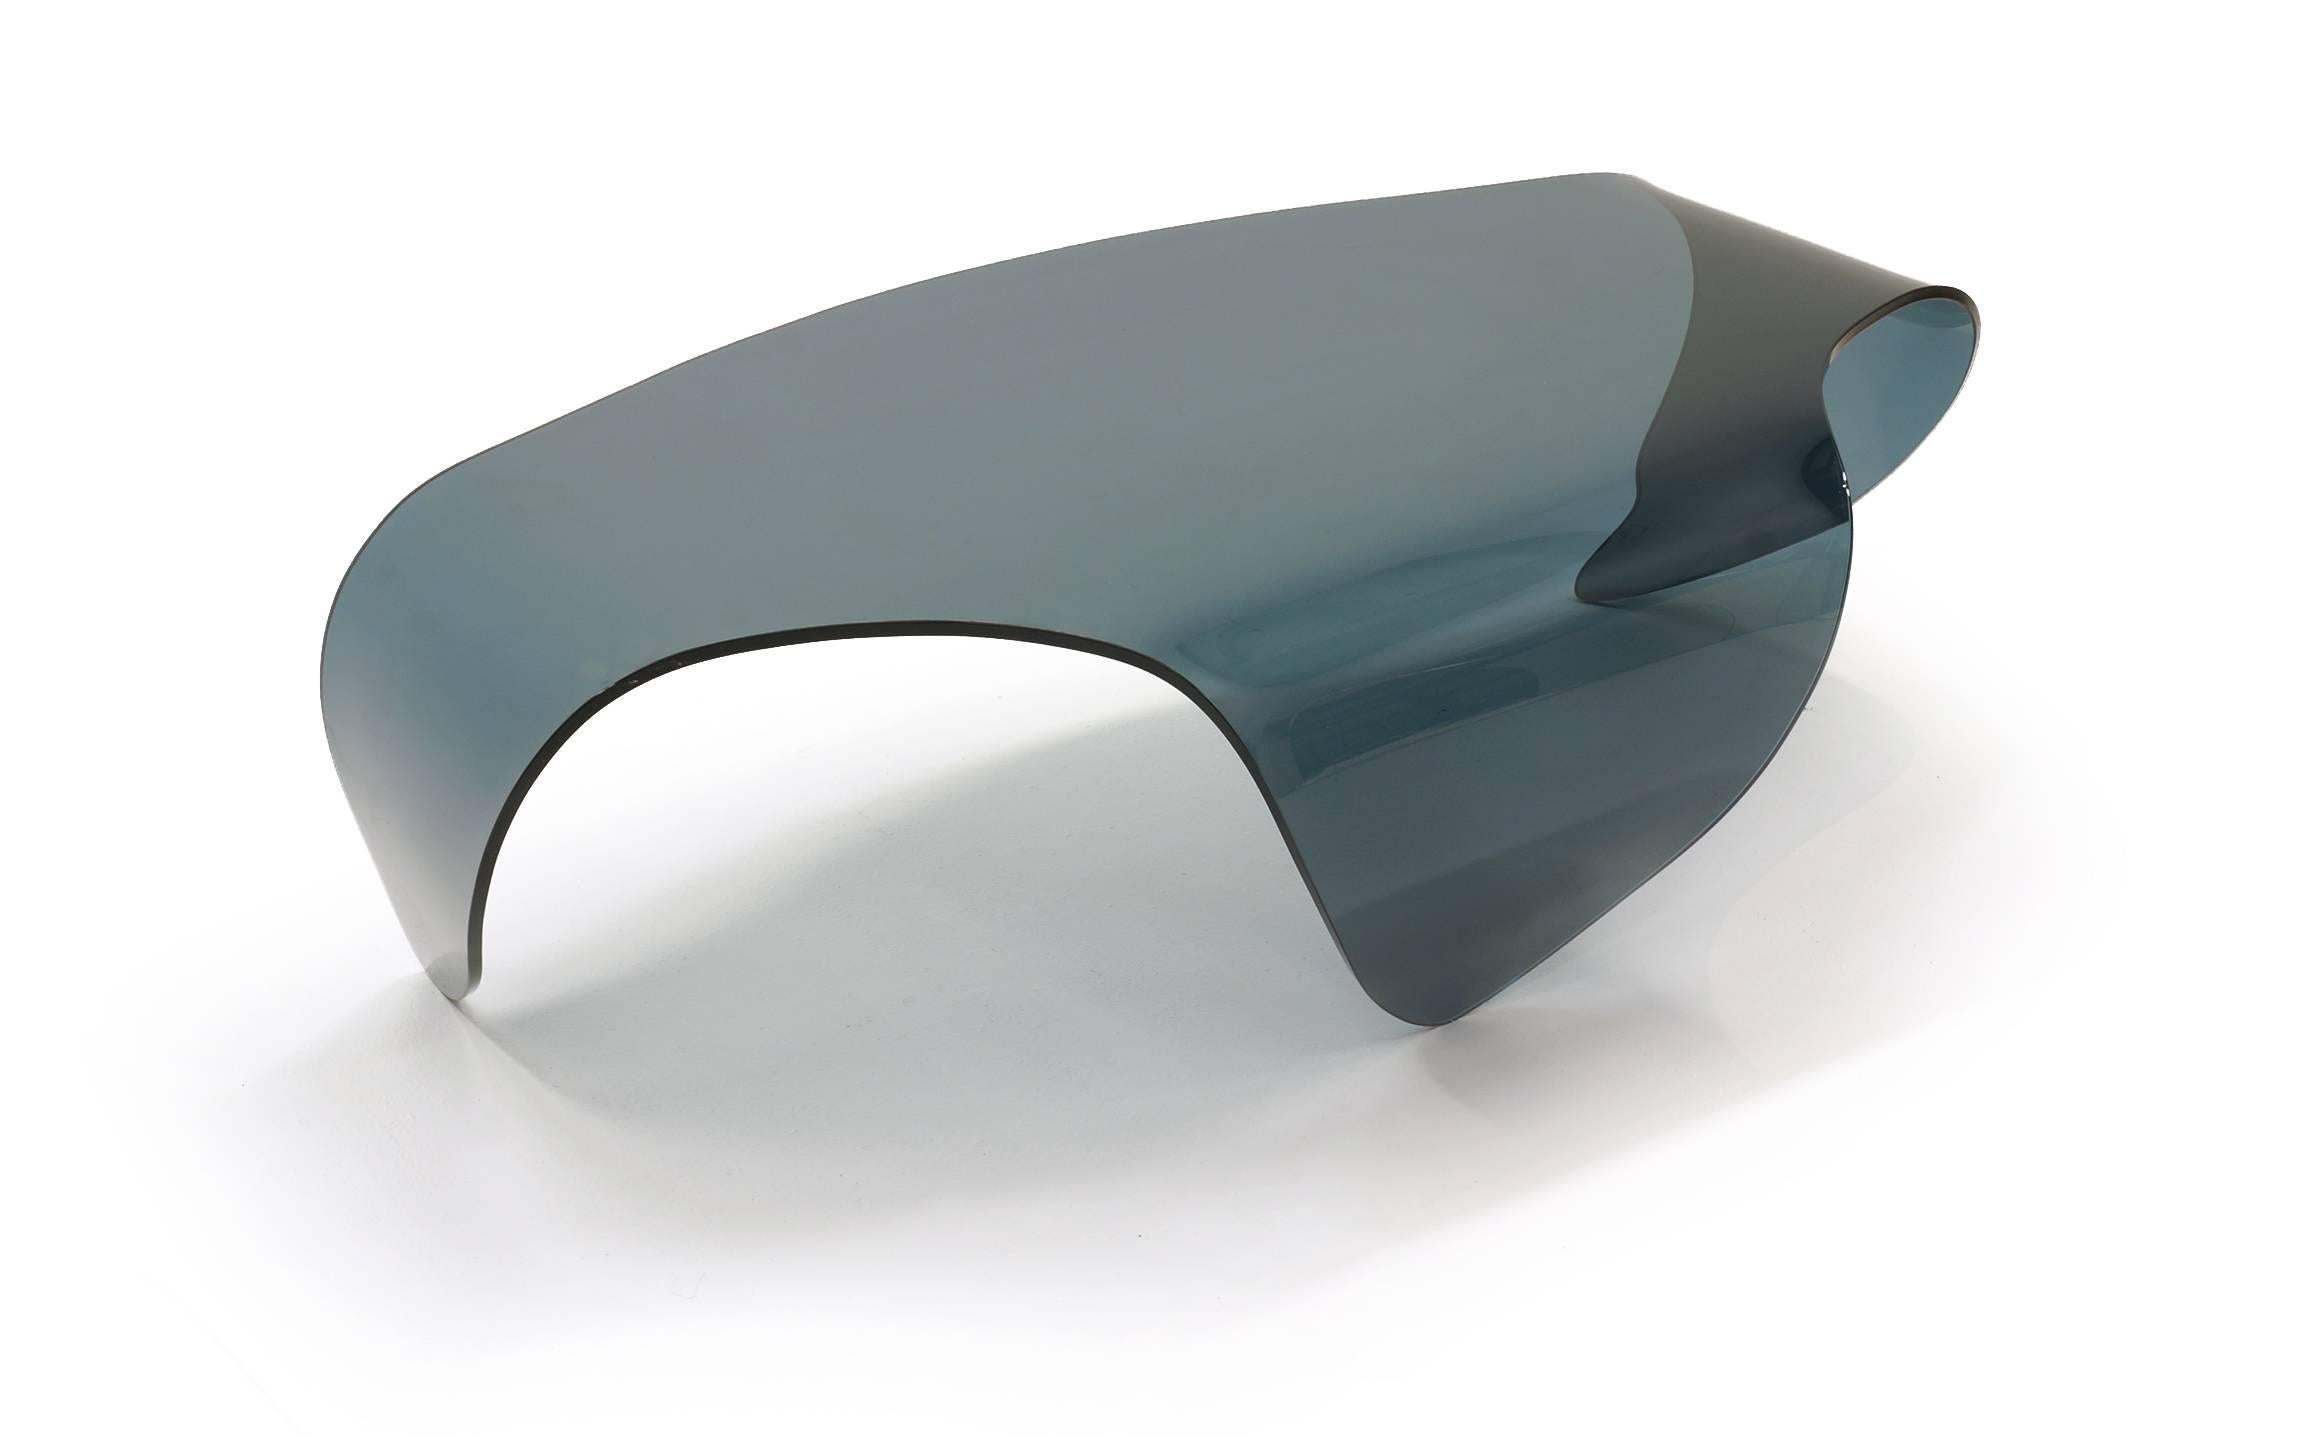 American All Glass Coffee Table, Biomorphic, Sculptural Blue/Gray Glass Form